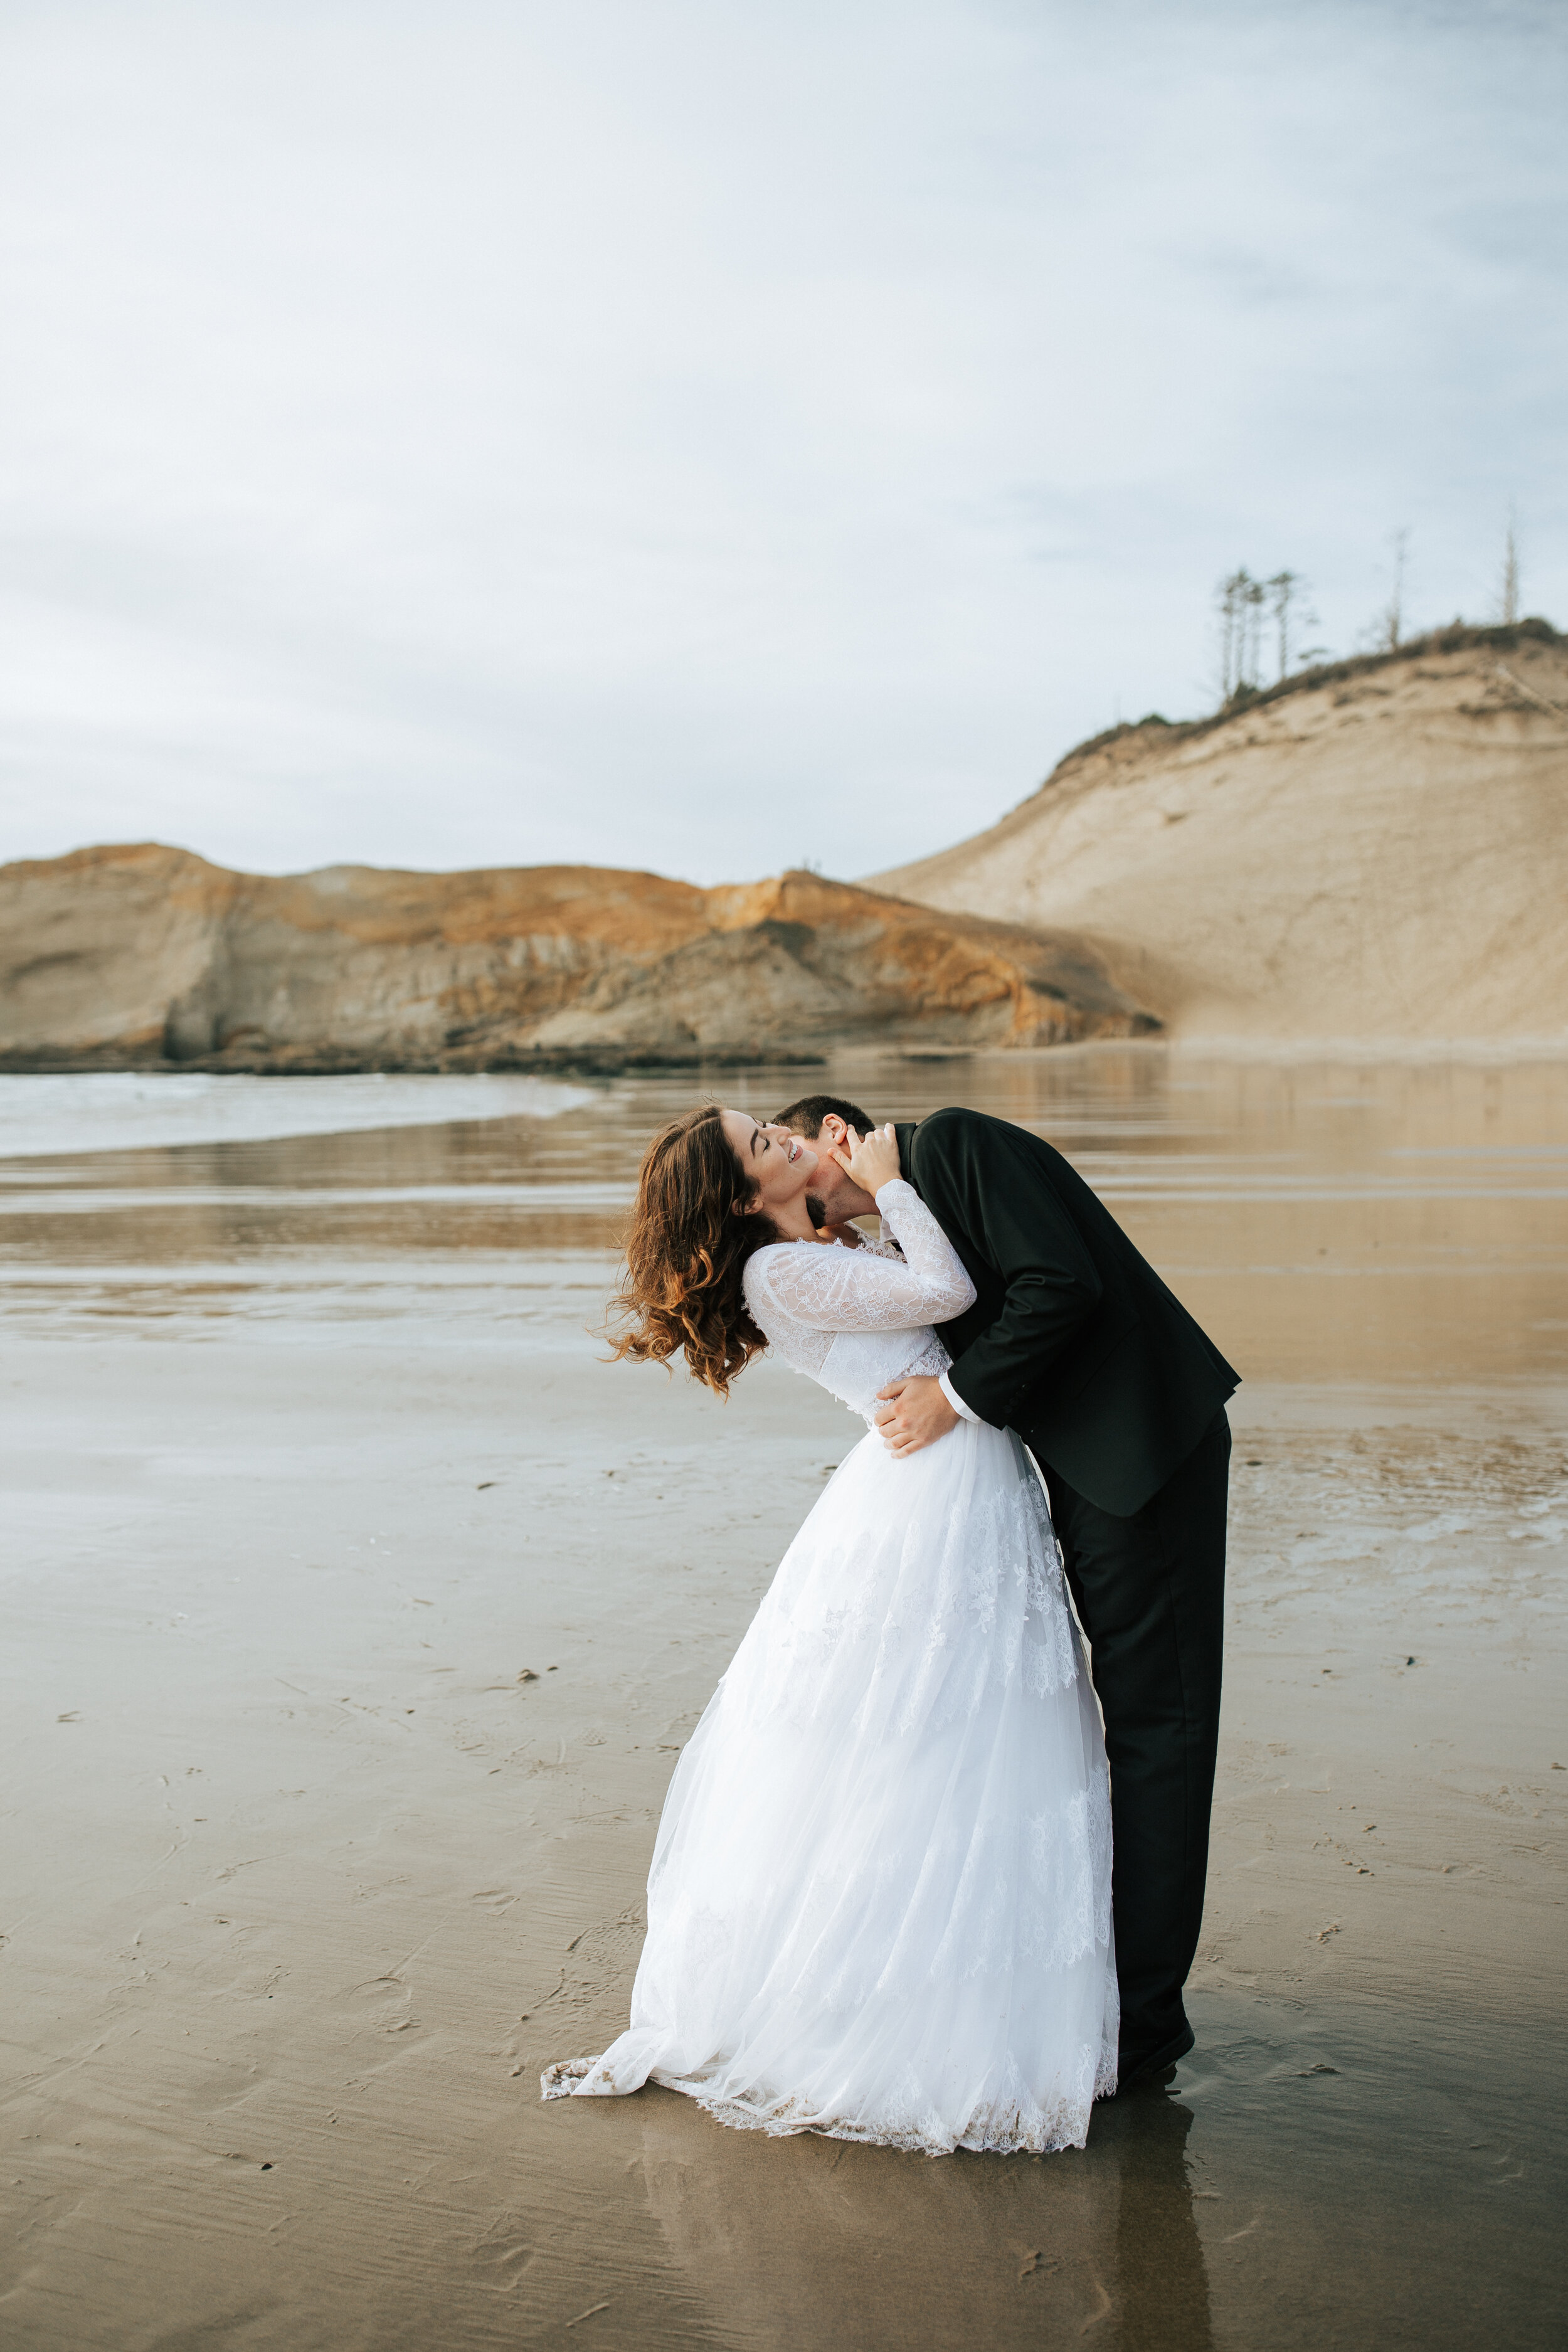  Emily Jenkins Photography captures a husband kissing a bride's neck on Cannon Beach, Oregon during an elopement. intimate wedding photography big beautiful beach for wedding photography white wedding gown and black suit #emilyjenkinsphotography #emi